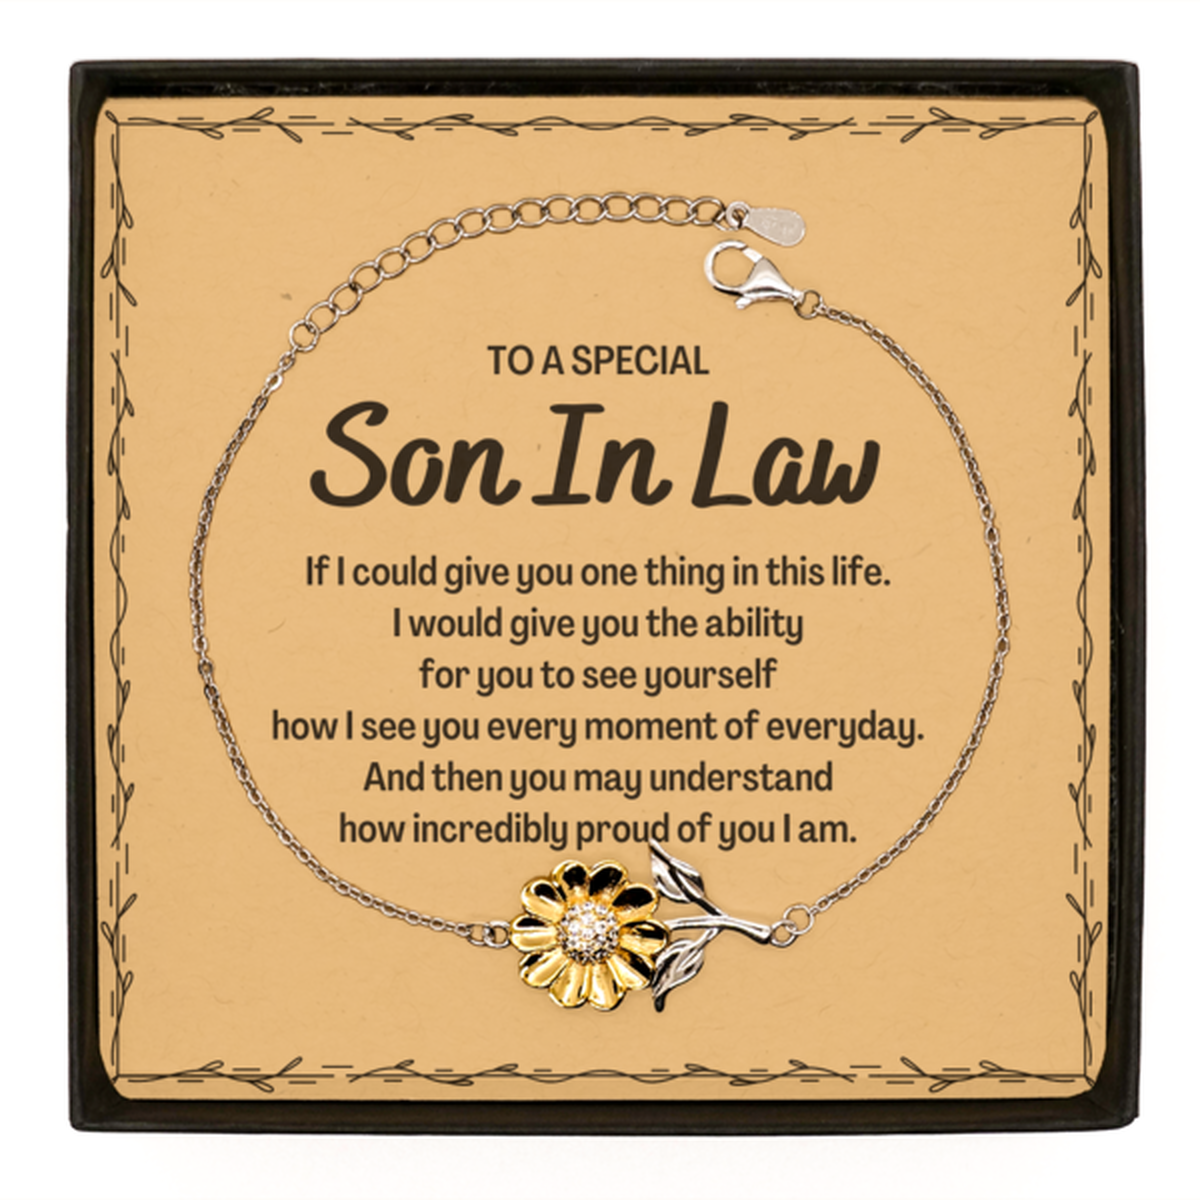 To My Son In Law Sunflower Bracelet, Gifts For Son In Law Message Card, Inspirational Gifts for Christmas Birthday, Epic Gifts for Son In Law To A Special Son In Law how incredibly proud of you I am